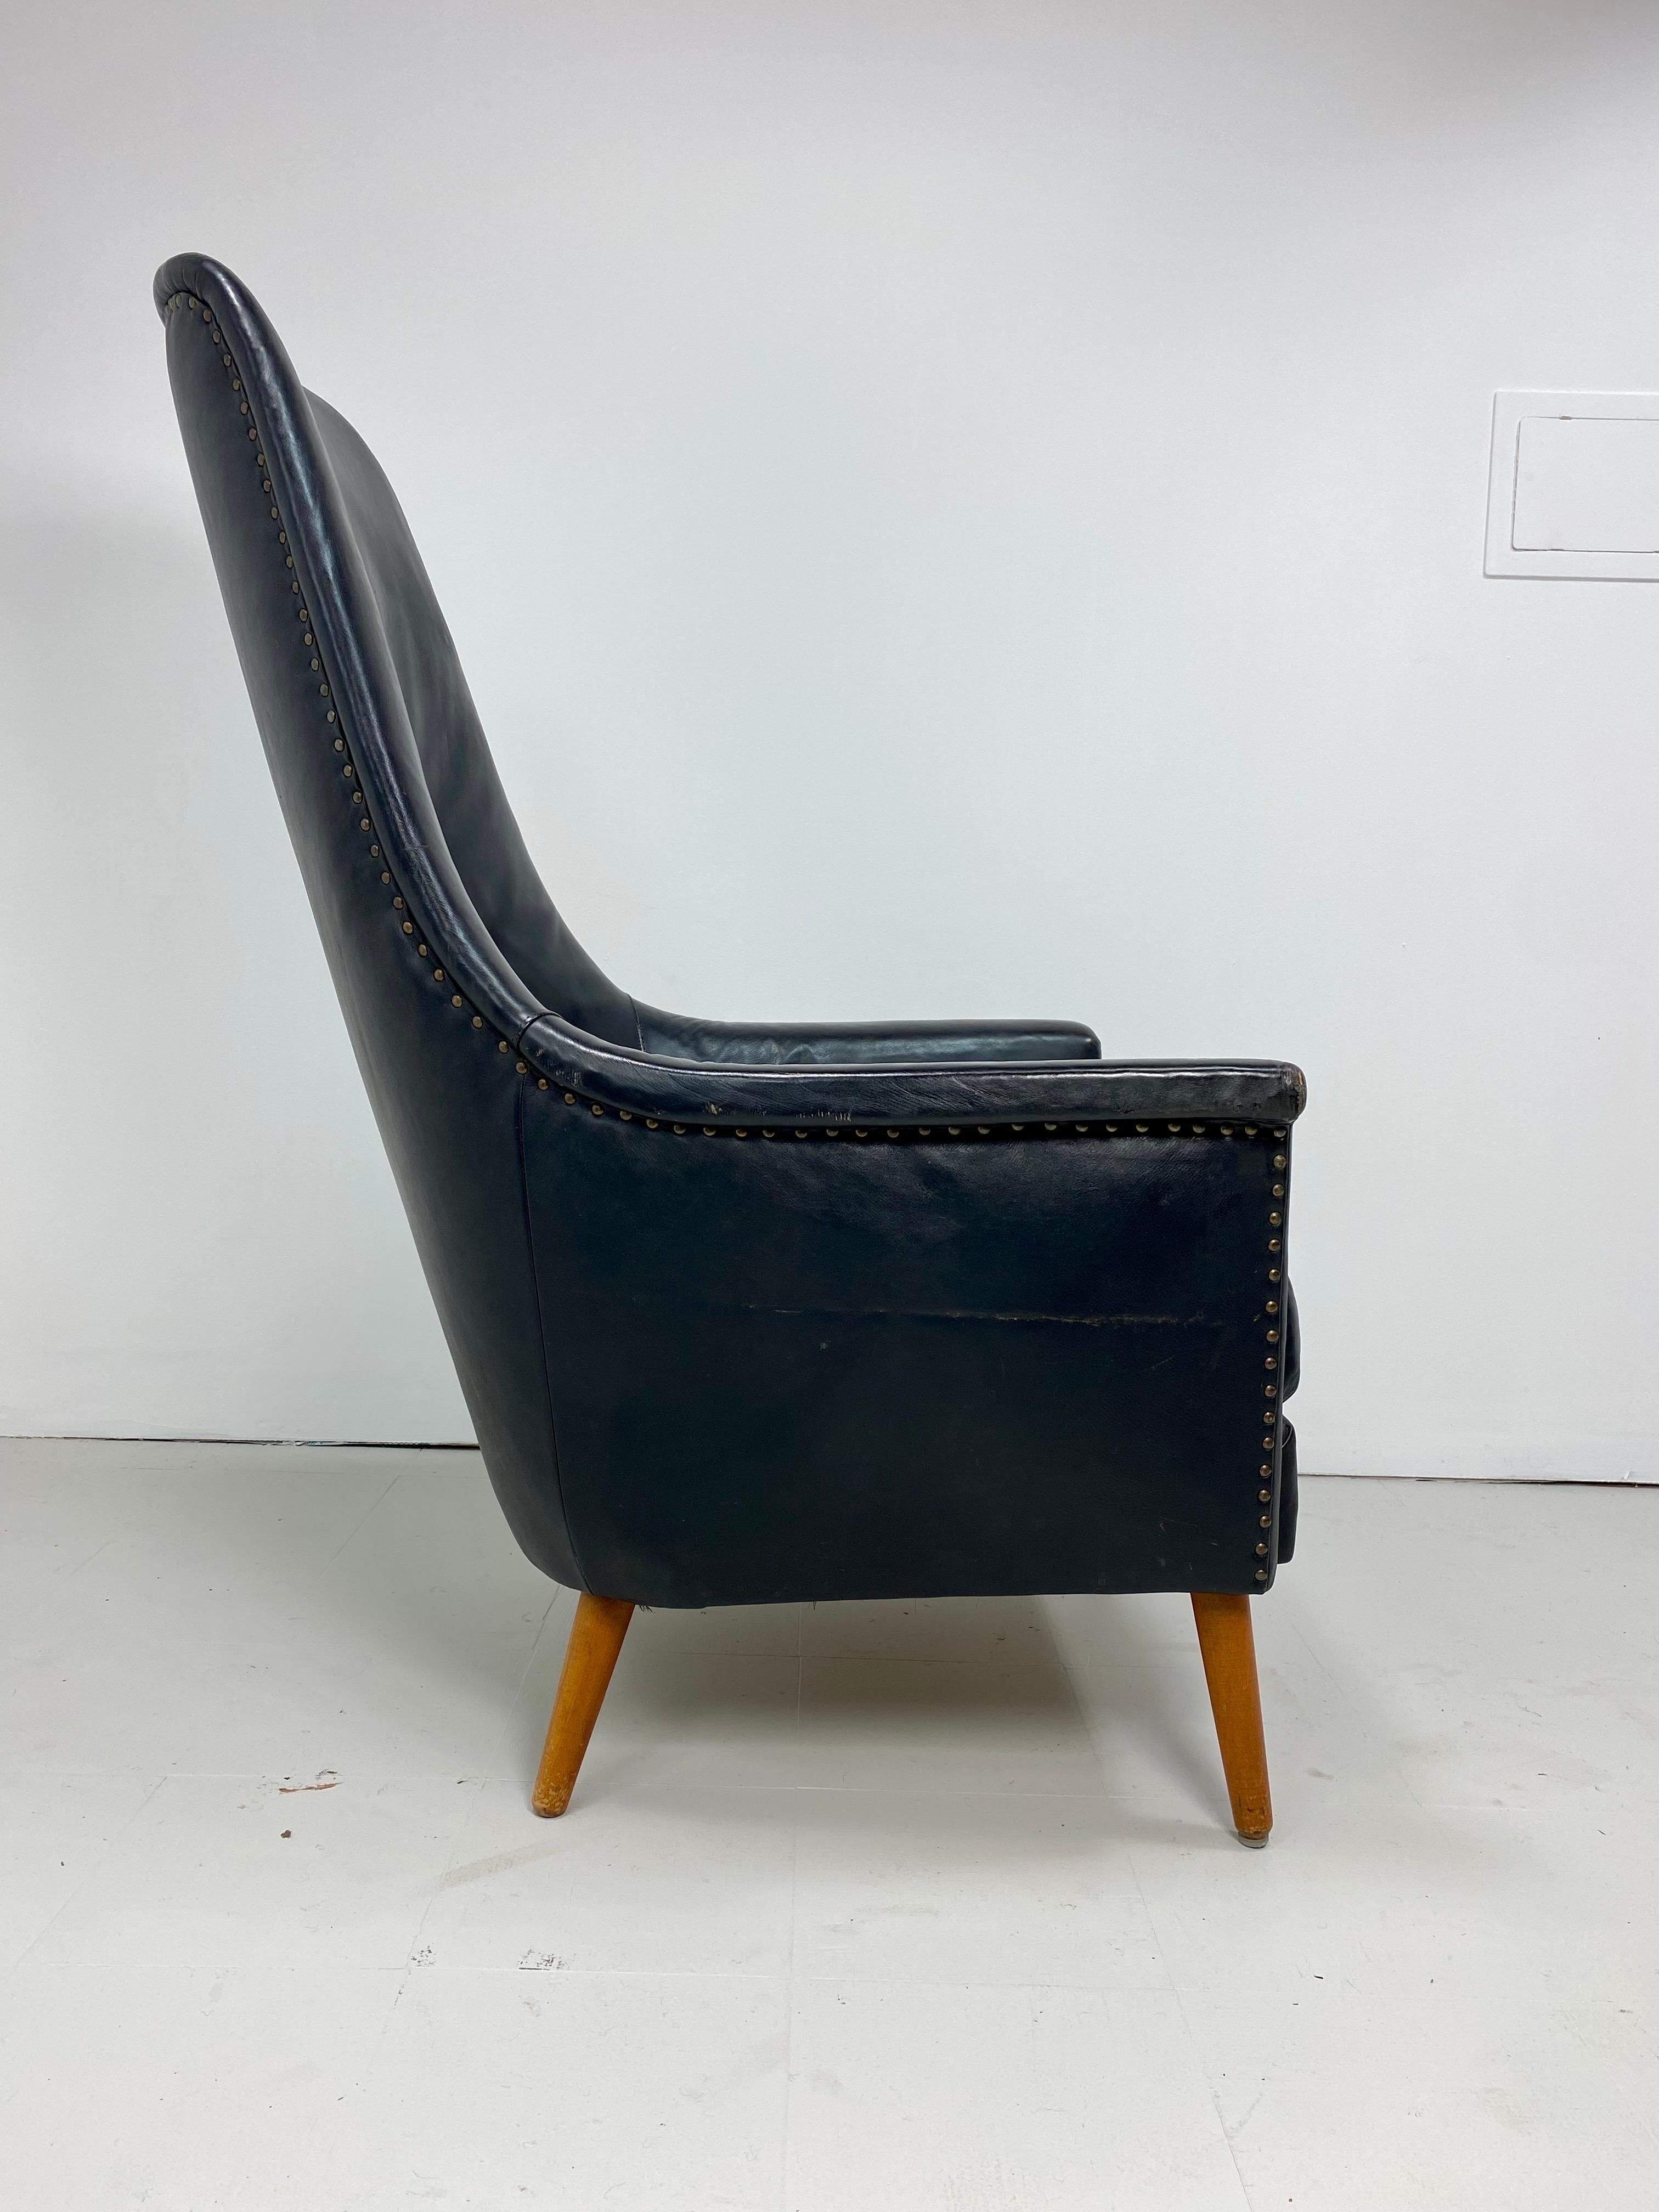 Sculptural Danish Leather High Back Lounge Chair. Original black leather. Nailed head details. Beech wood legs. 1950’s. Denmark. 


